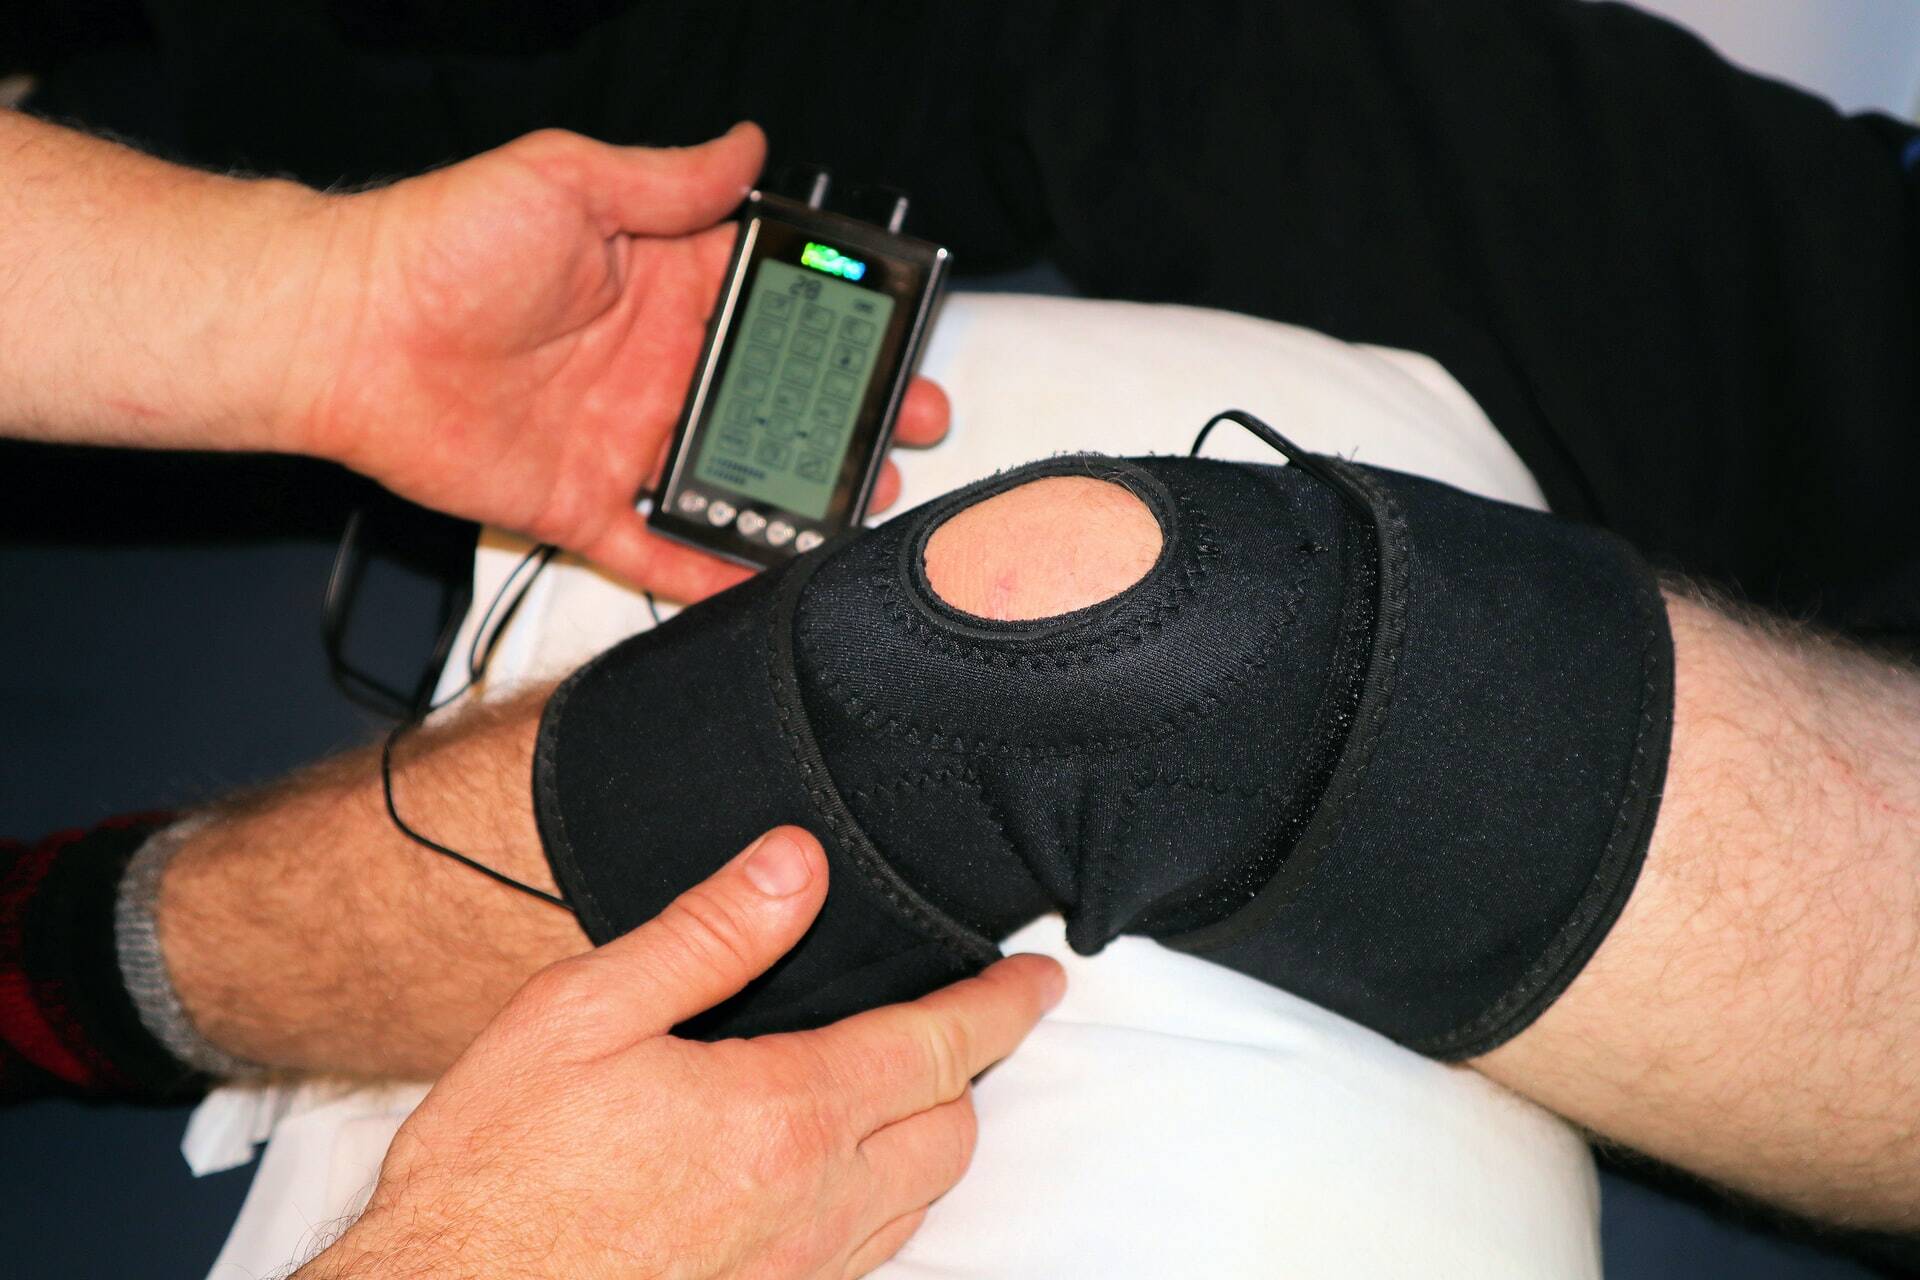 Equipment being used on a persons knee